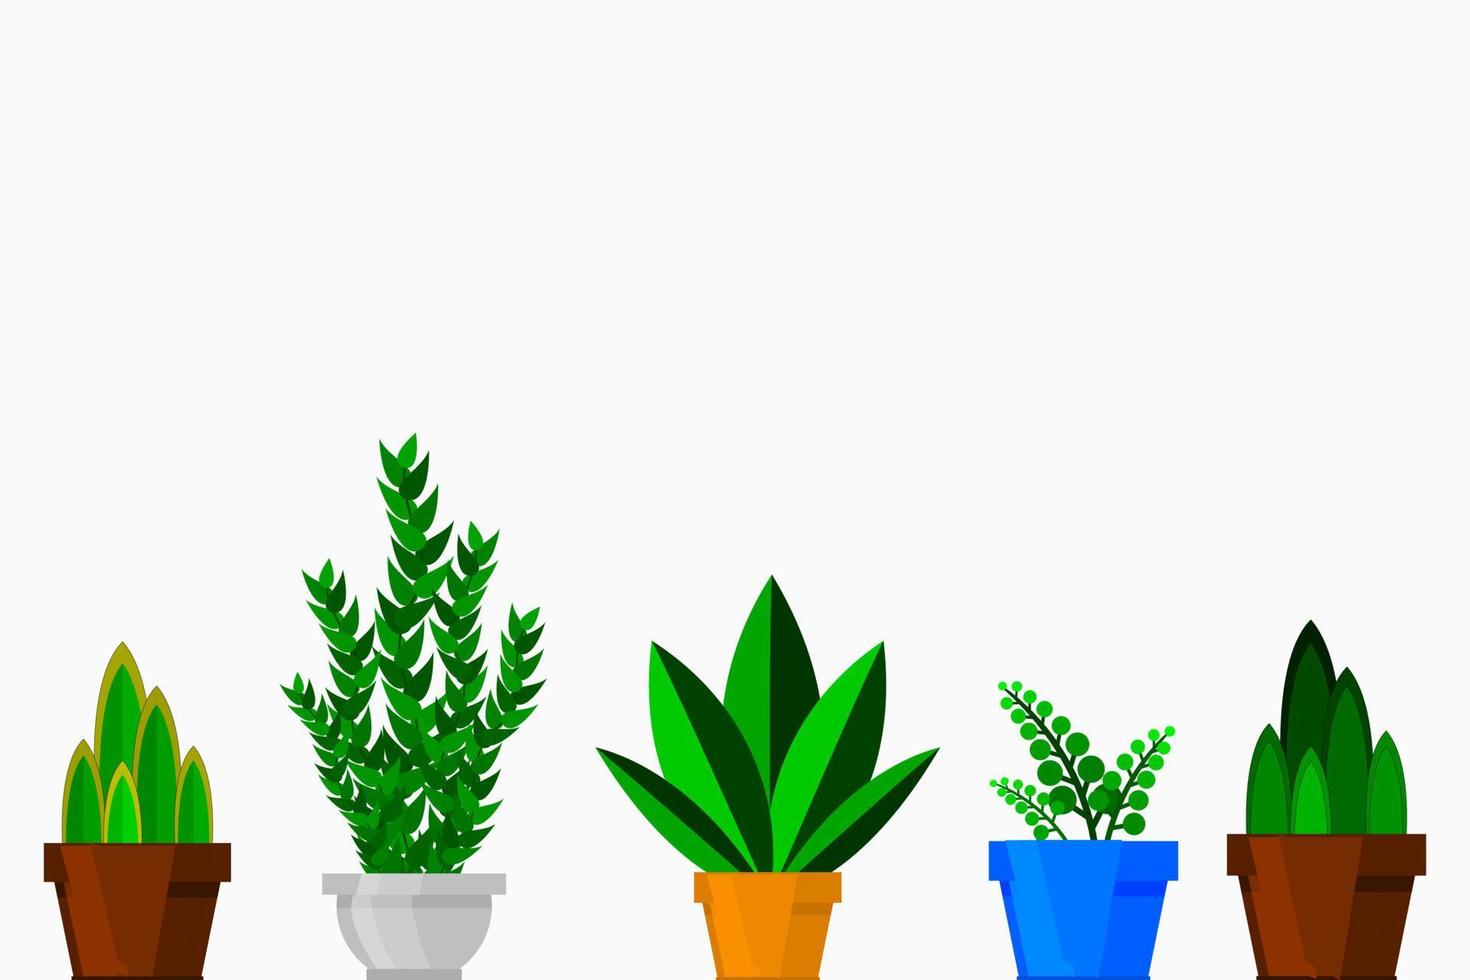 Indoor and outdoor landscape garden potted plants isolated on white vector